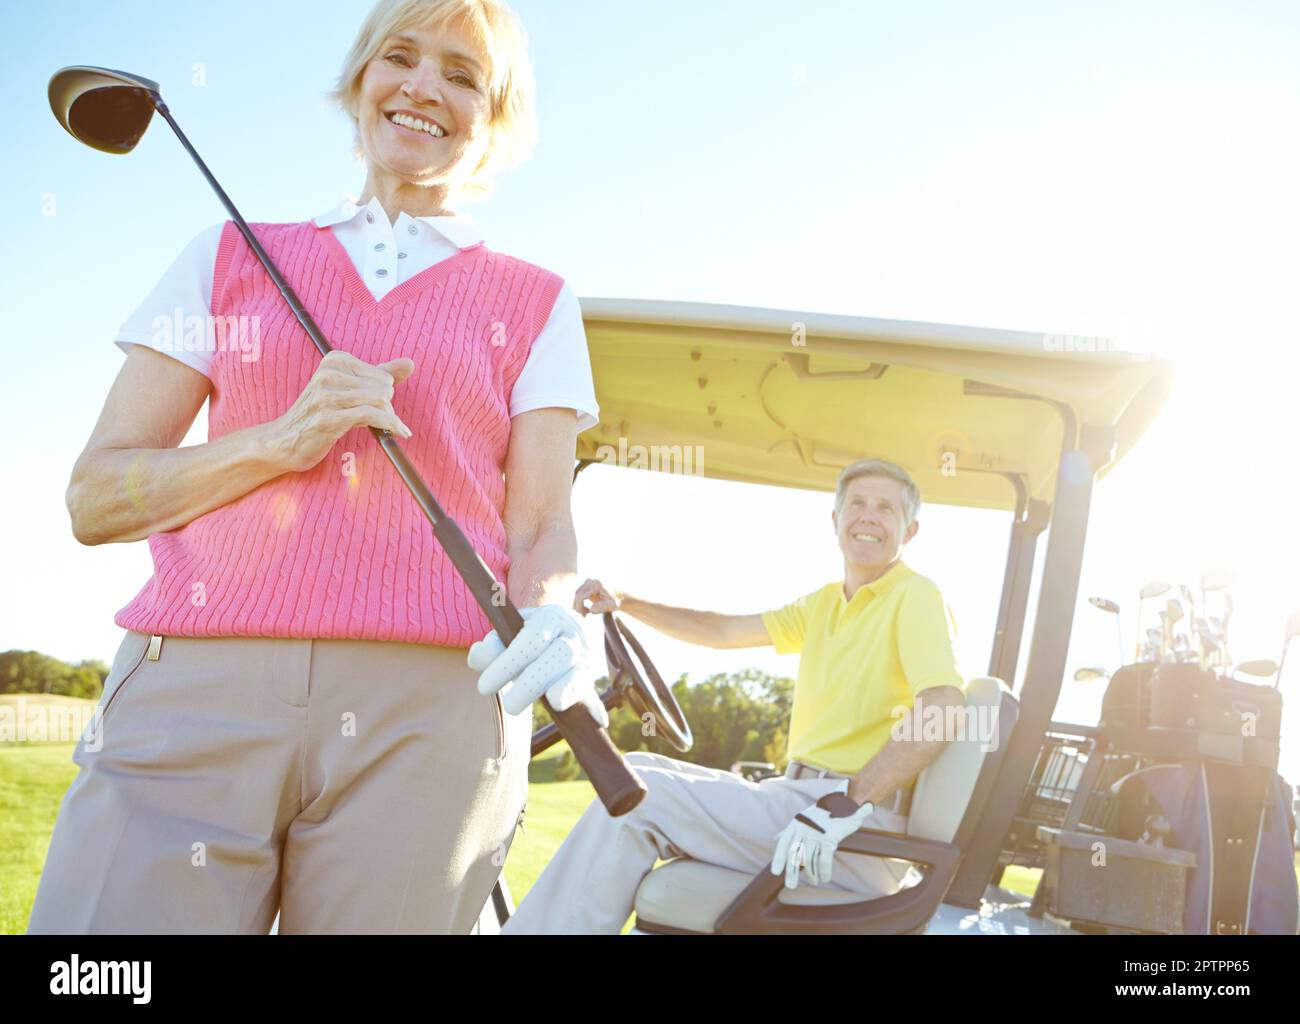 Golfing is her favorite pastime. Low angle shot of an attractive older female golfer standing in front of a golf cart with her golfing buddy behind Stock Photo